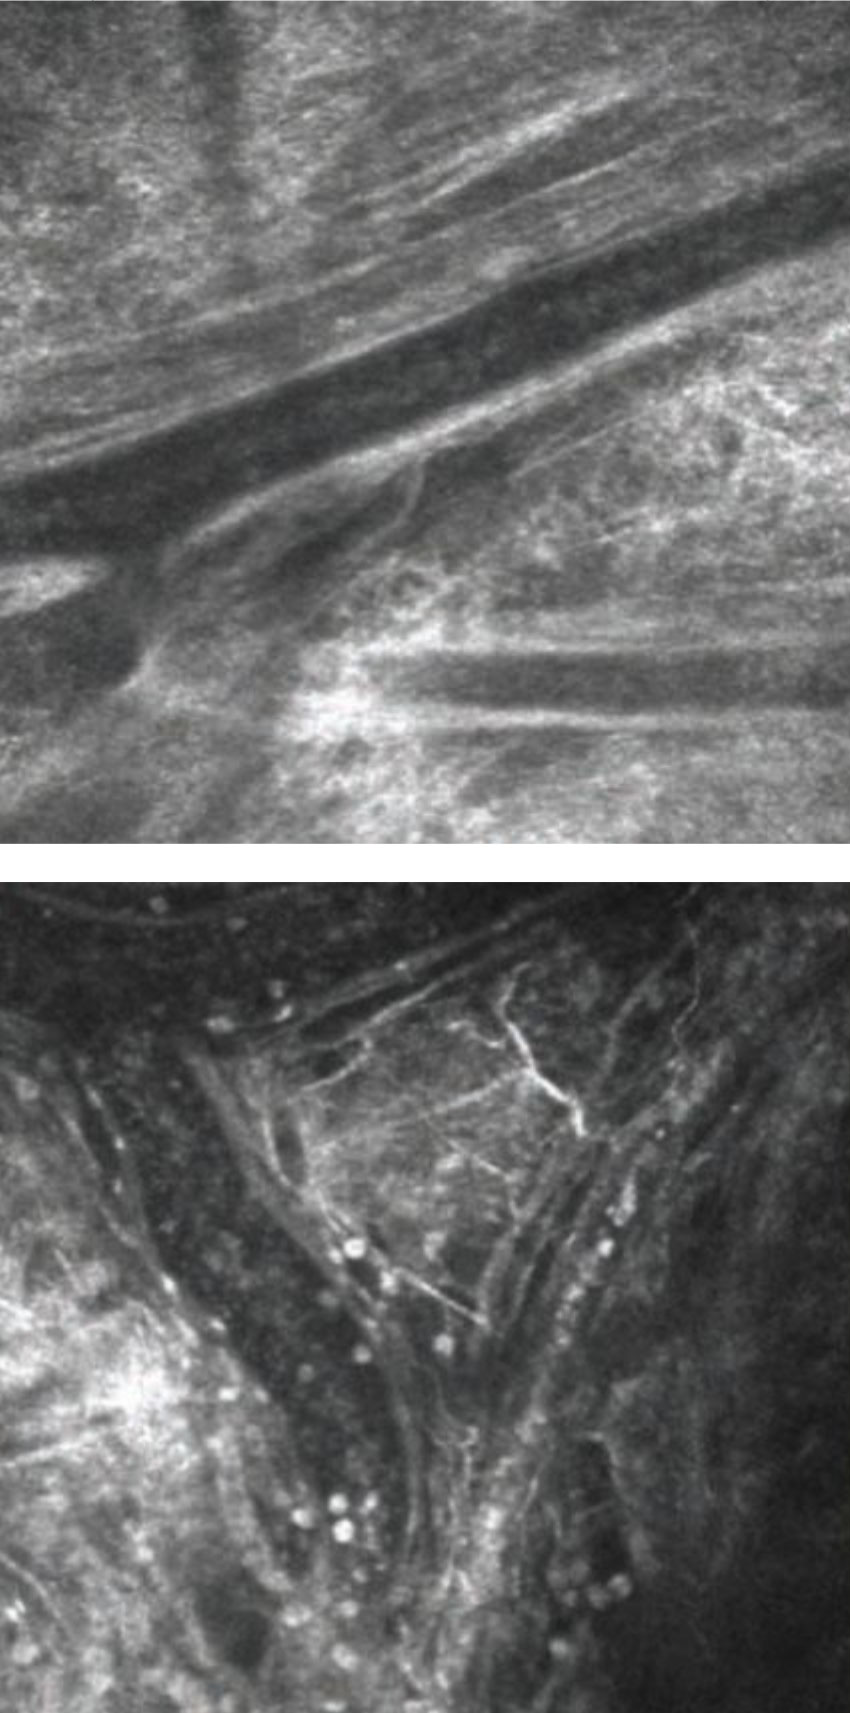 In vivo imaging of conjunctival blood vessels before (left) and after (right) allergen challenge. White cells are clearly visible following challenge, and some of these can be see migrating out of vessels into extravascular space. Photo: Mark B. Abelson, MD, CM